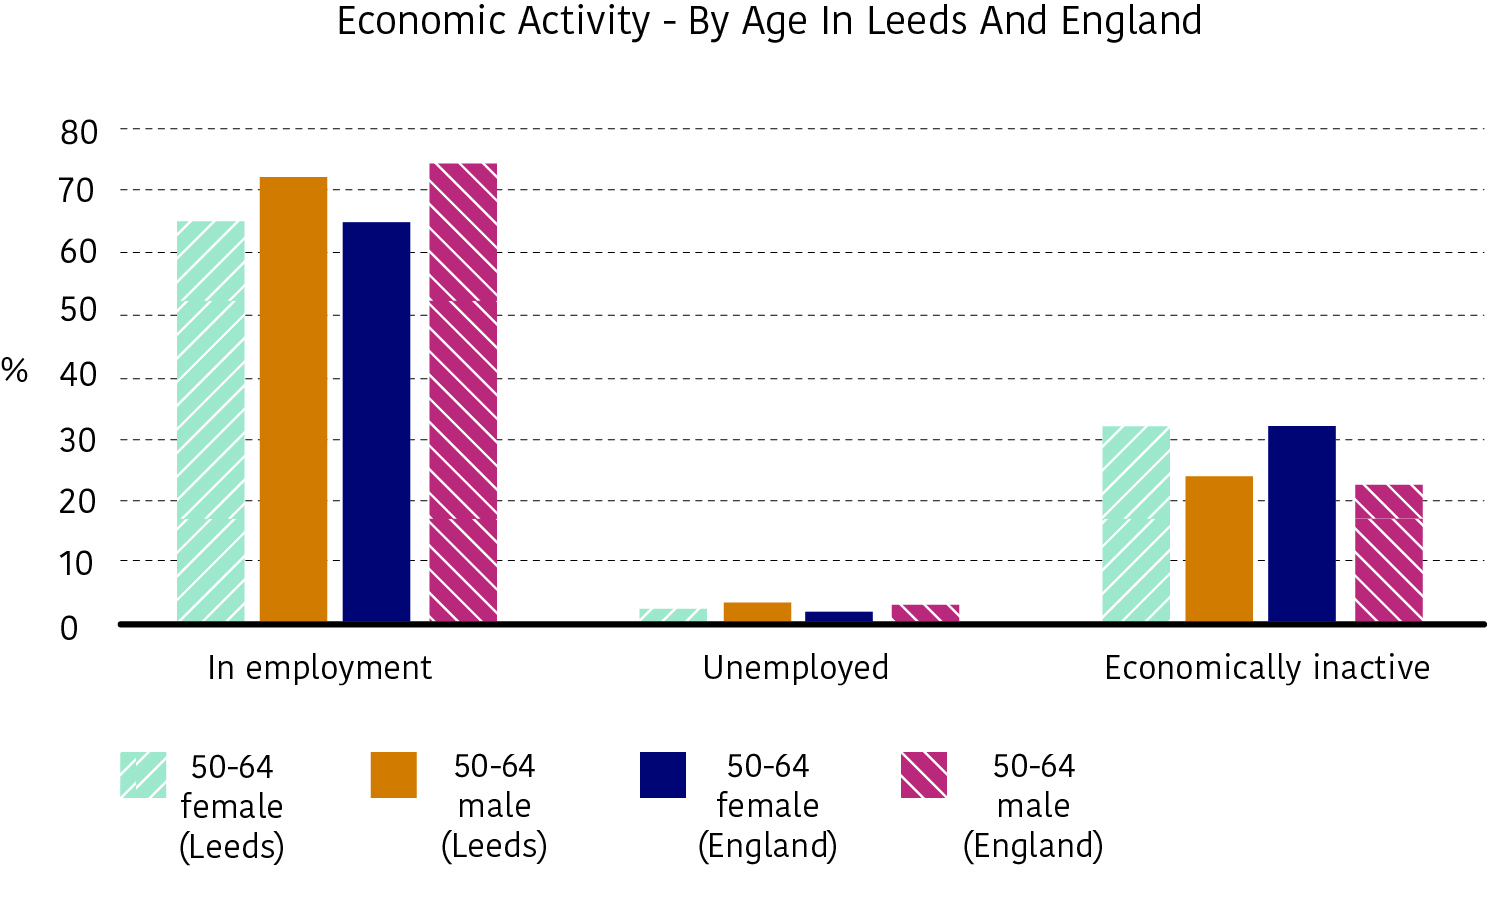 The bar chart shows the economic activity of different groups. Groups included females aged 50-64 in Leeds, males aged 50-64 in Leeds, females aged 50+ in England and males aged 50+ in England. Figures in Leeds are similar to the national averages.